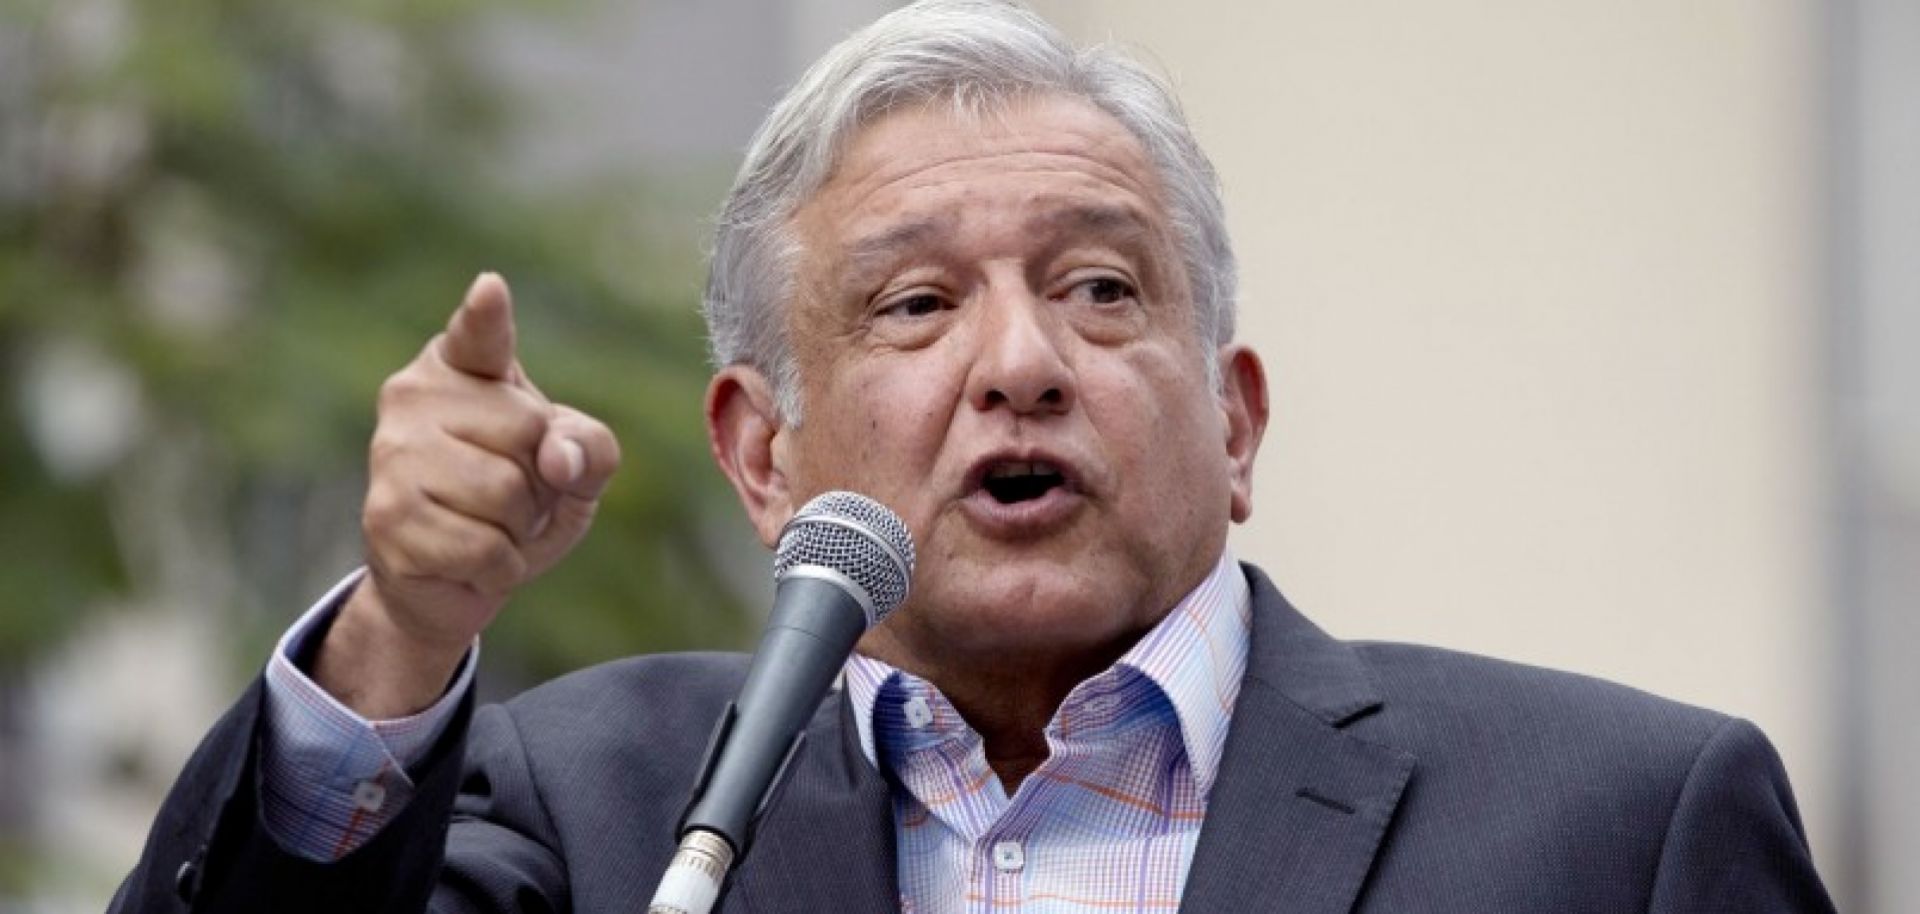 The rapid rise of populist presidential candidate Andres Manuel Lopez Obrador is stoking concerns in the United States about the future of Mexico's security and economic policies.